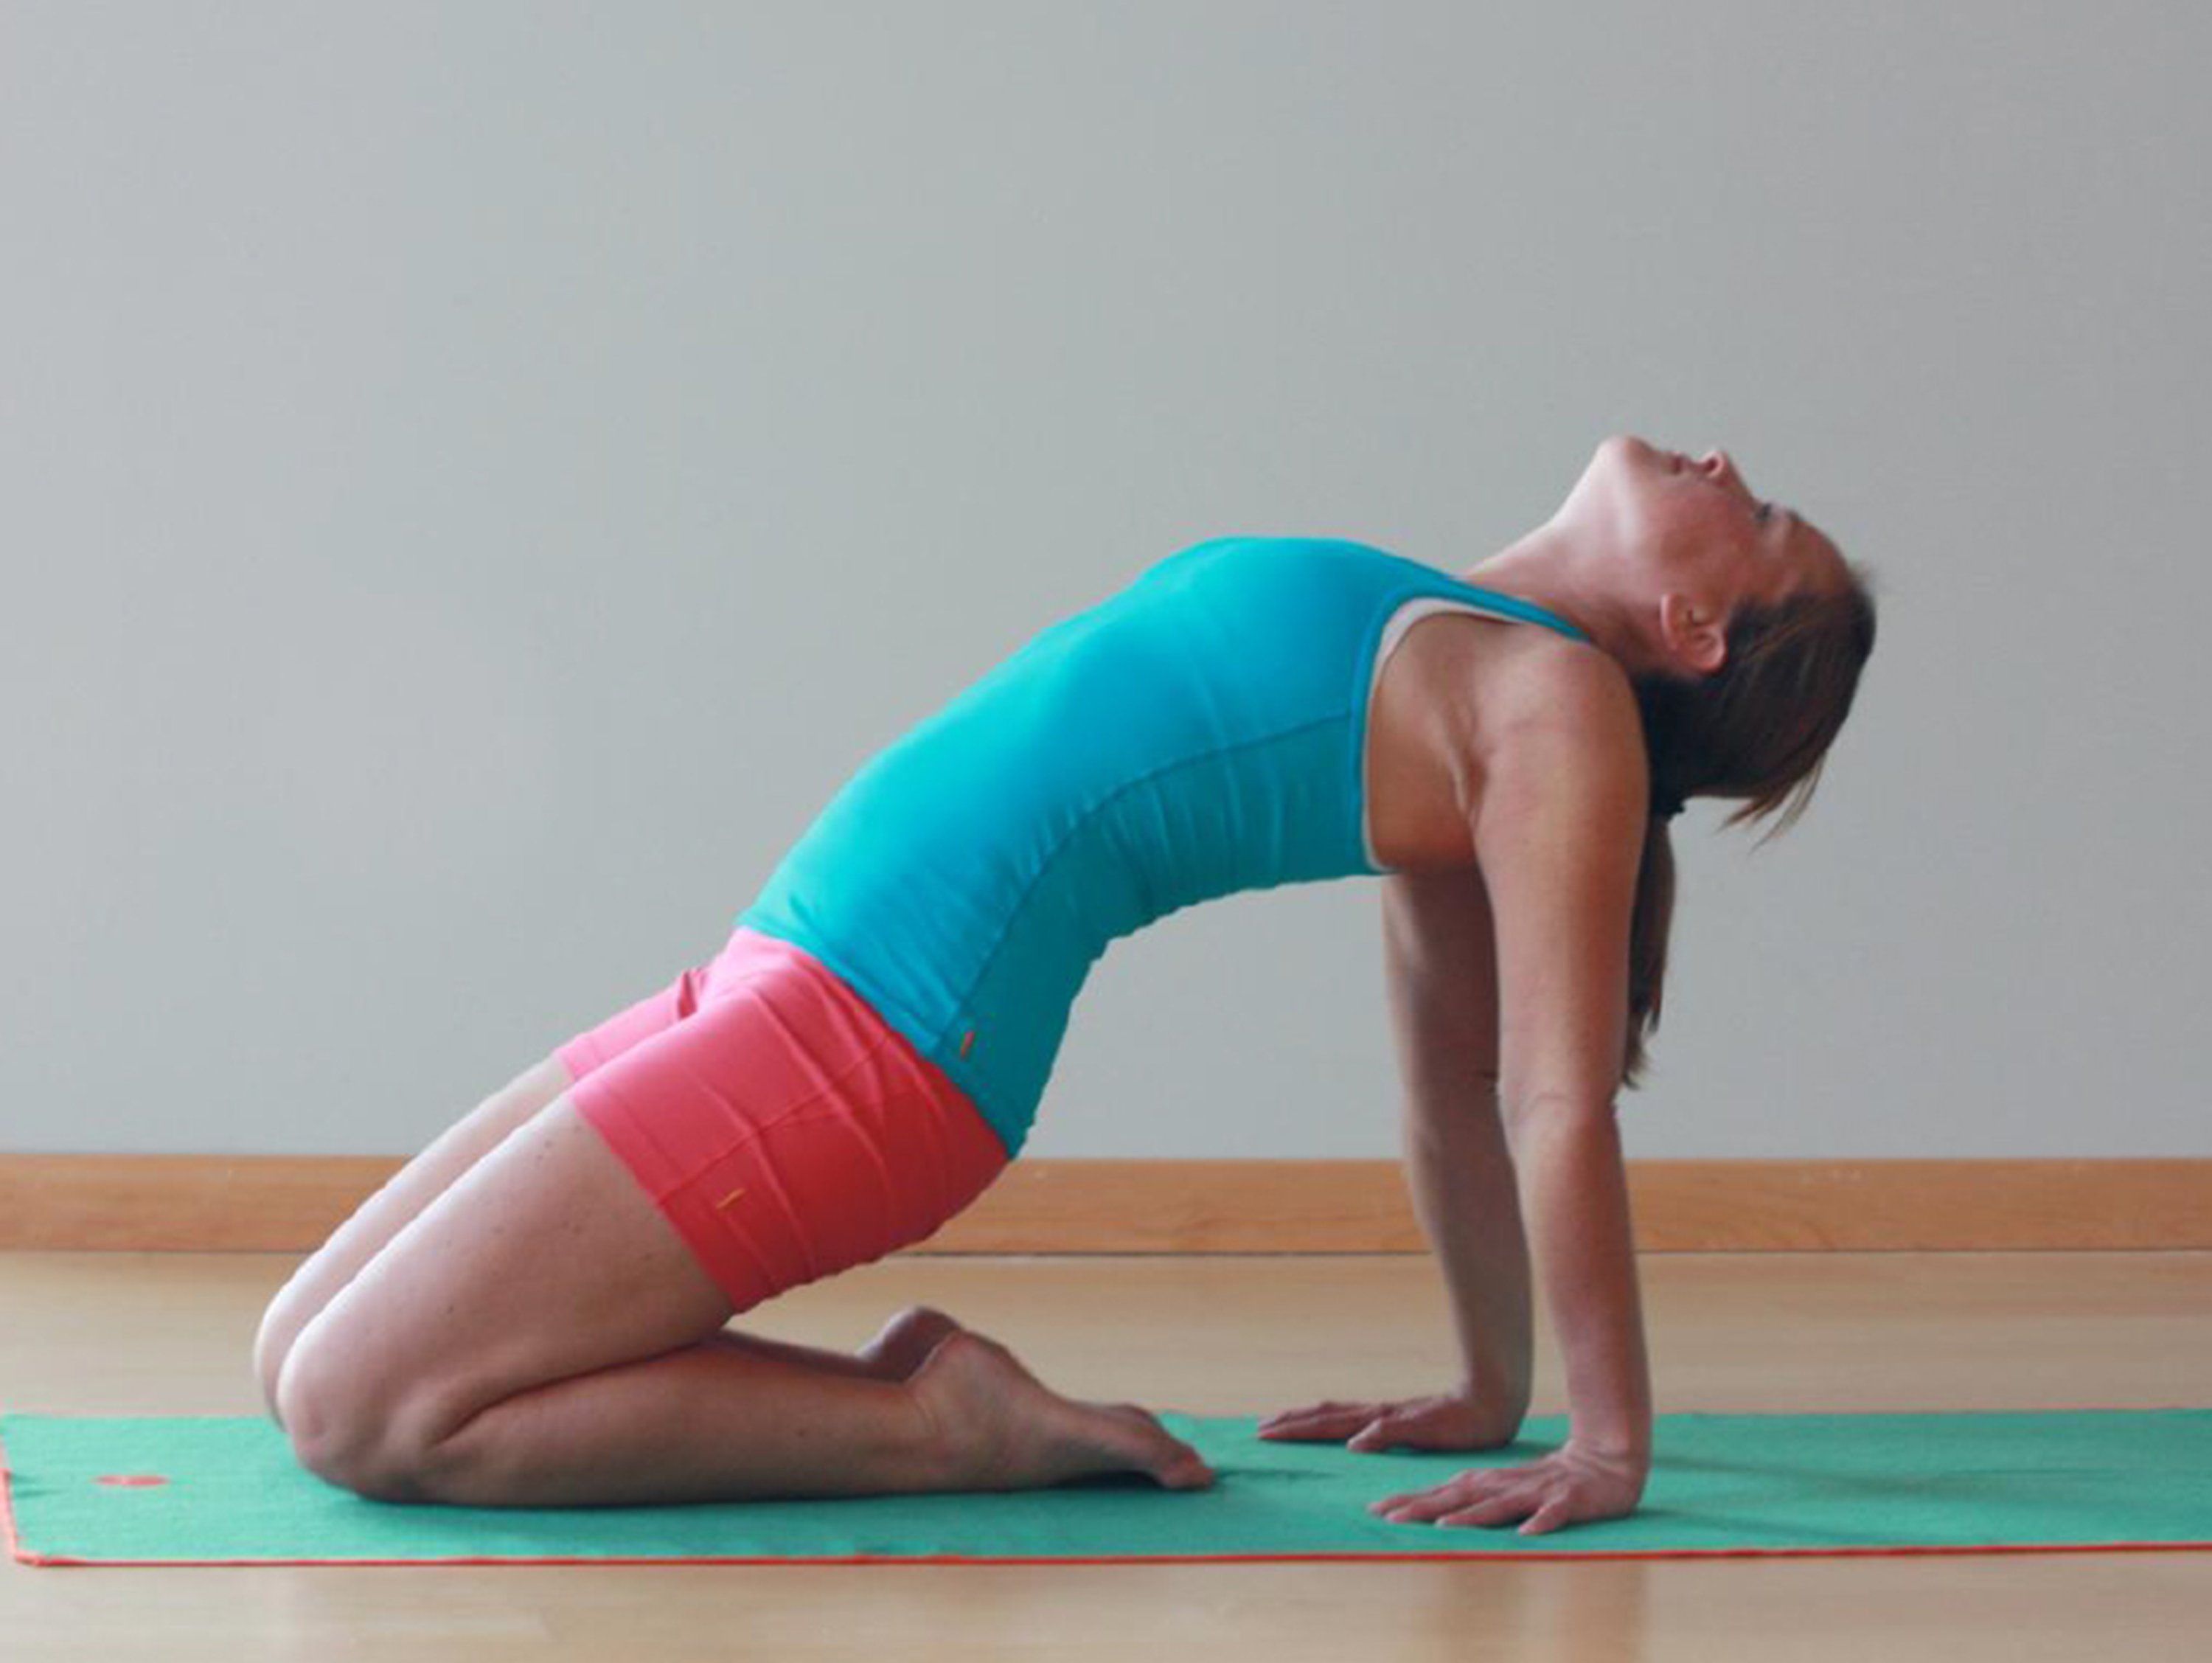 7 Yoga Poses to Work Those Easily Overlooked Lower Abs